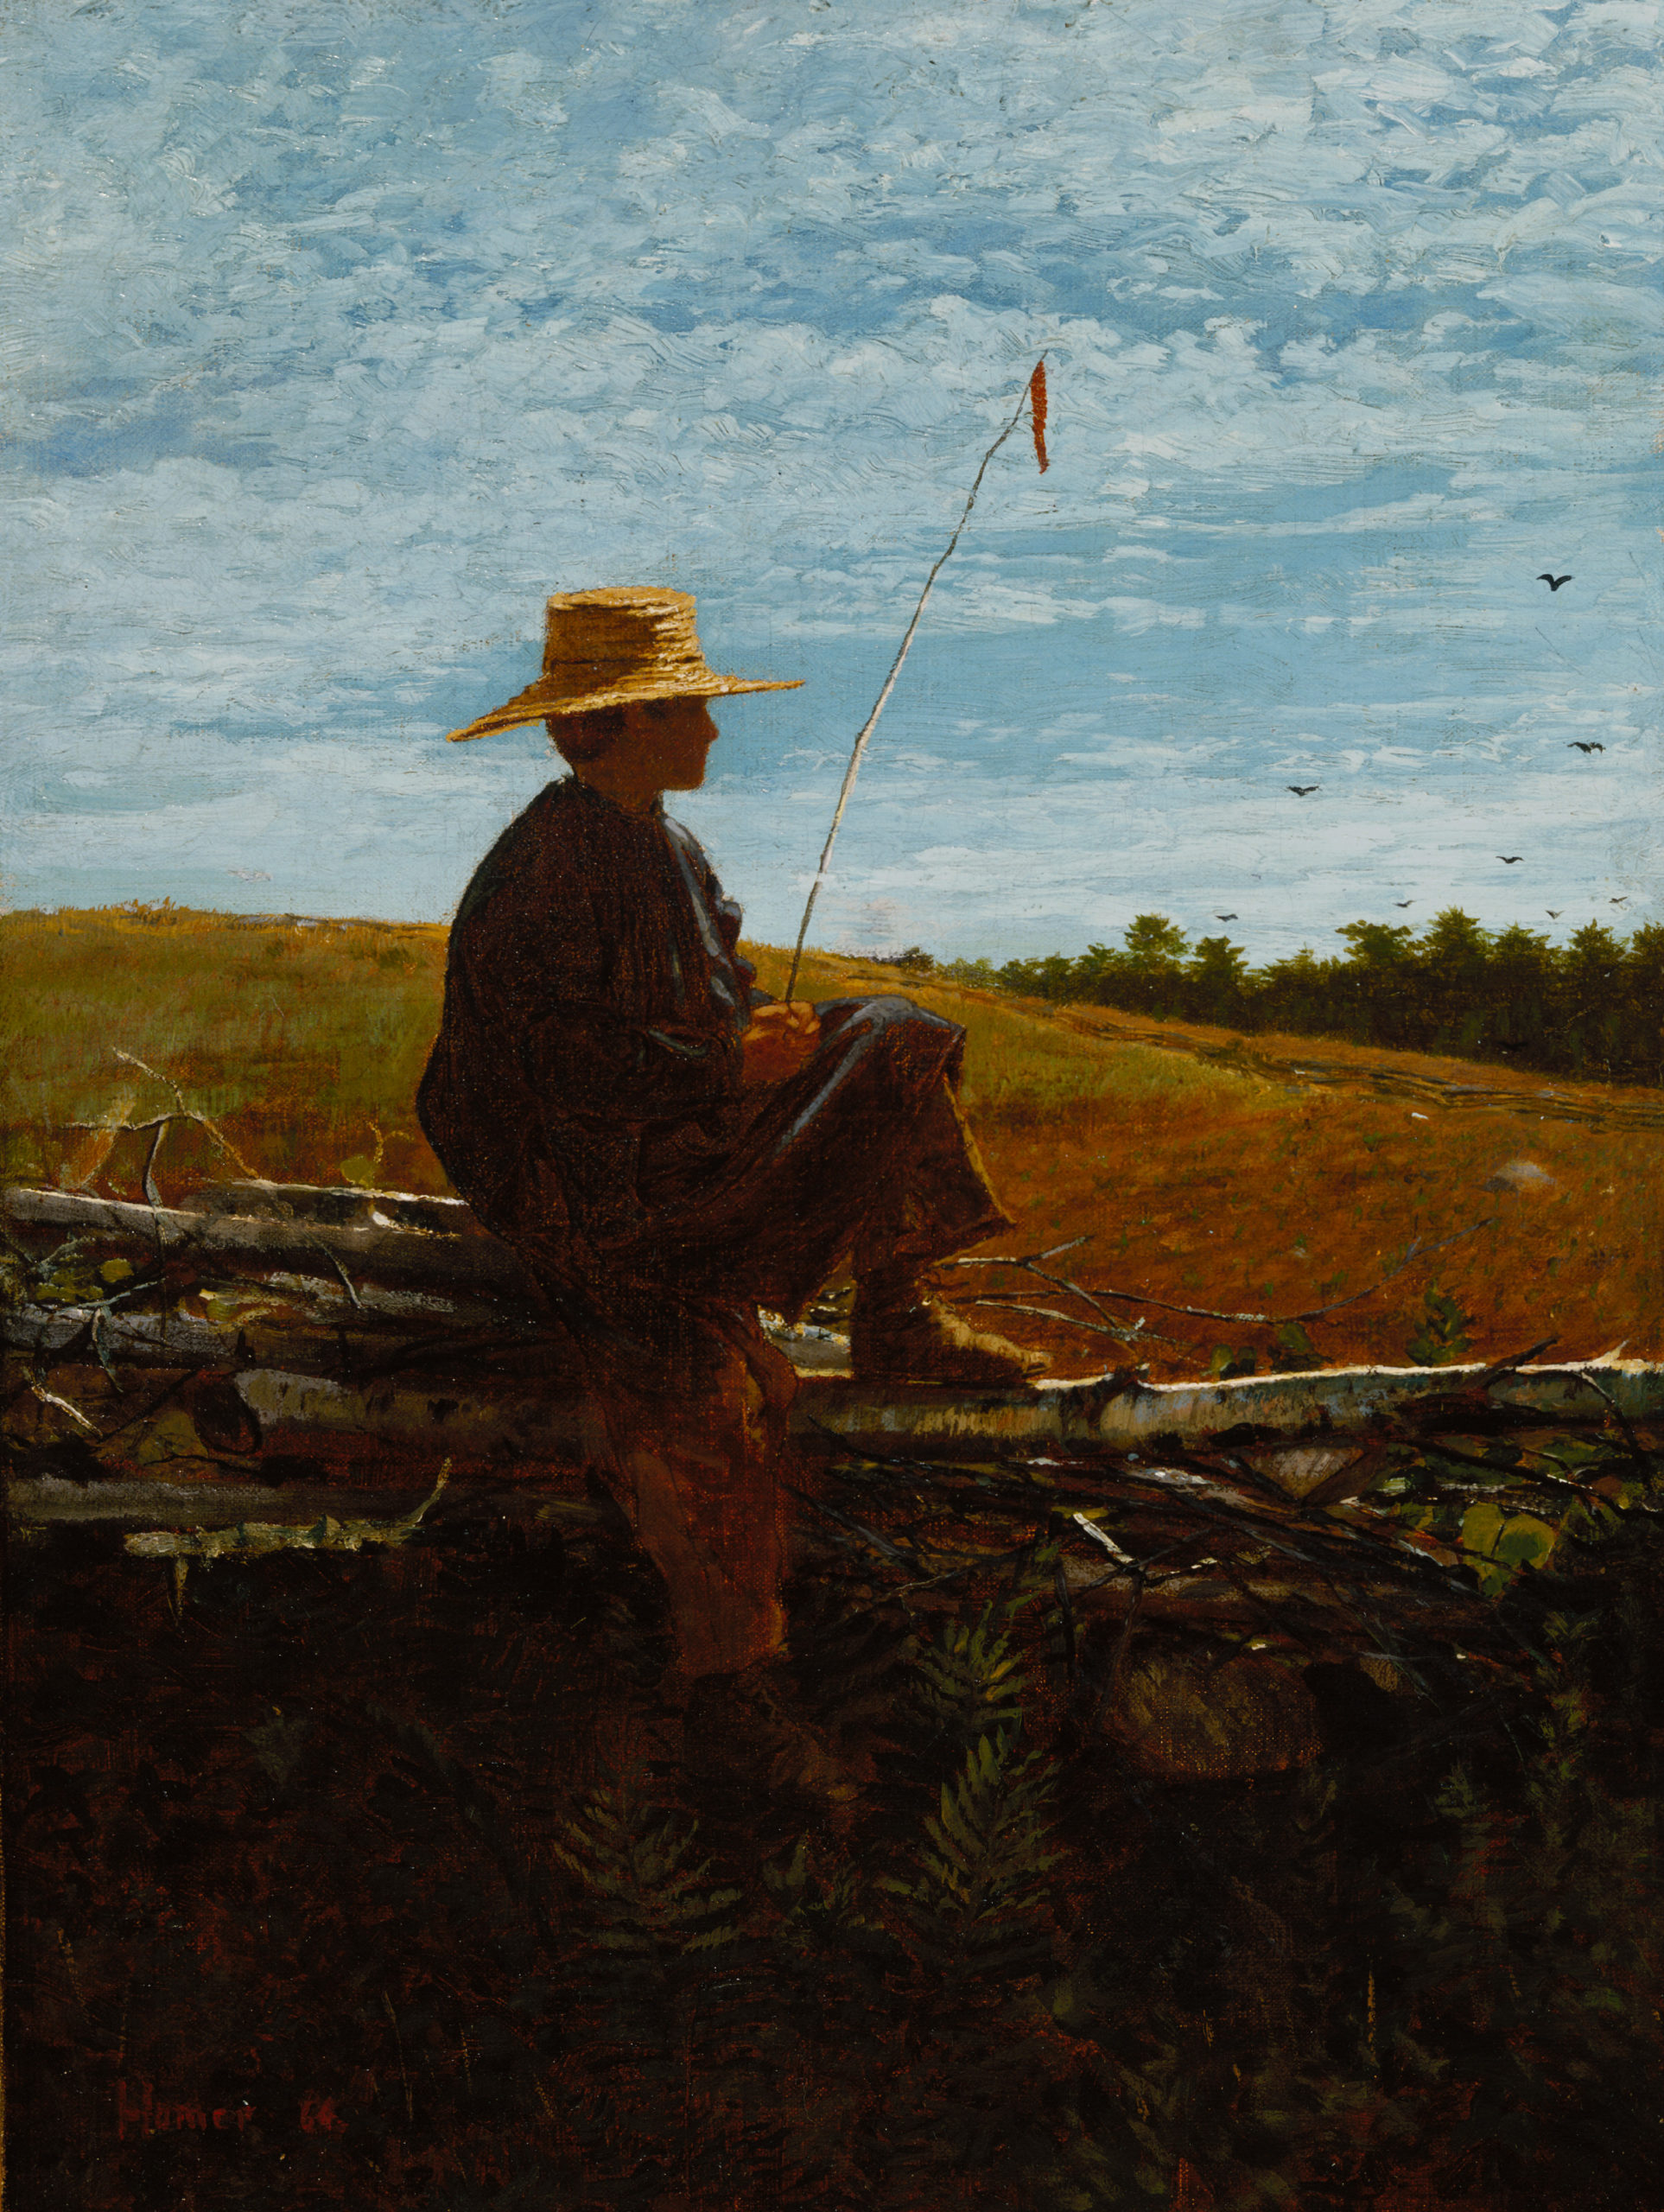 Winslow Homer, On Guard, 1864, oil on canvas, 12 1/4 x 9 1/4 inches (Terra Foundation for American Art)